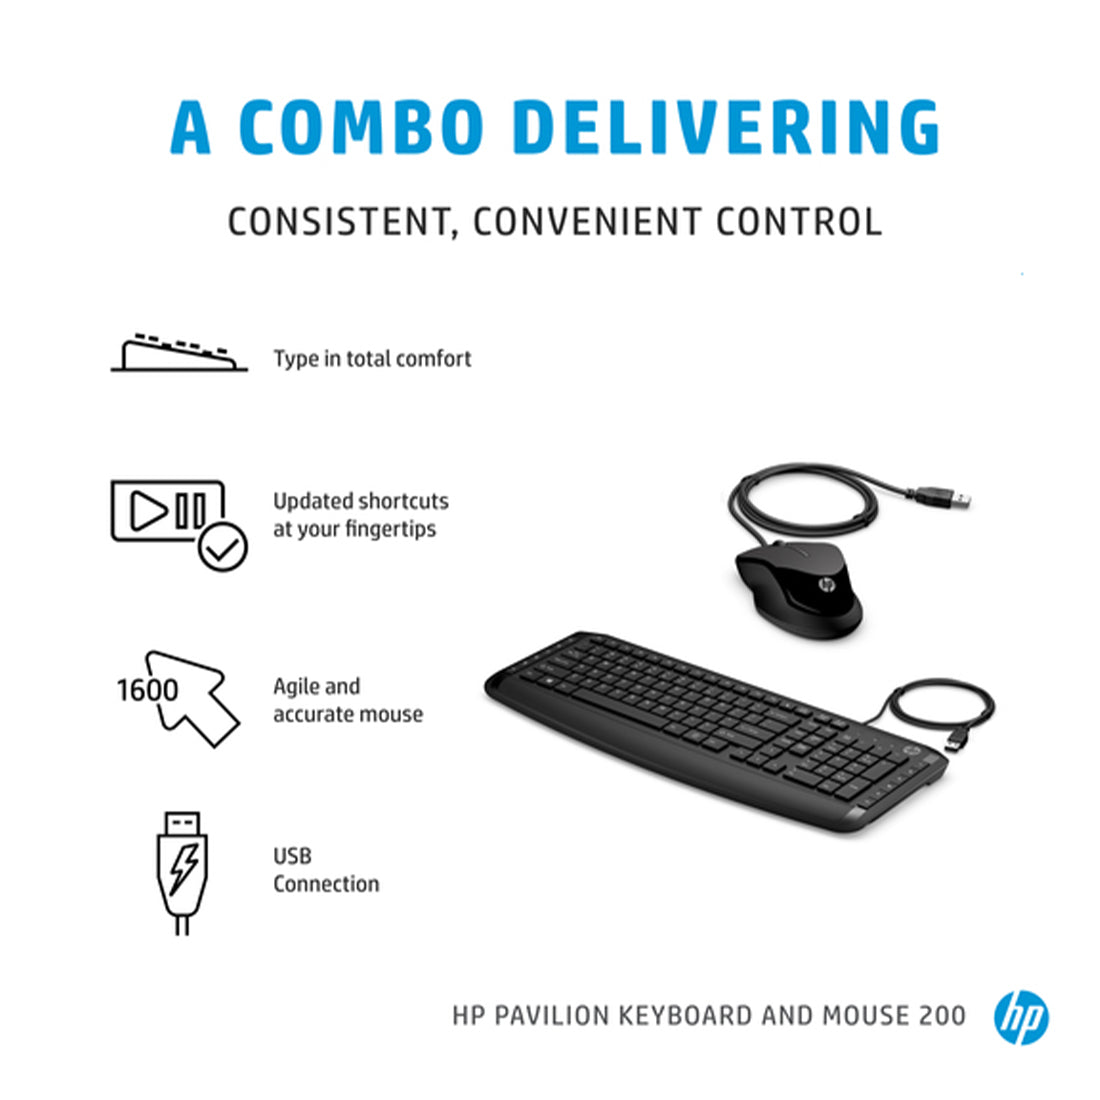 [RePacked] HP Pavilion 200 Wired Keyboard and Optical Mouse with 1600 DPI Combo